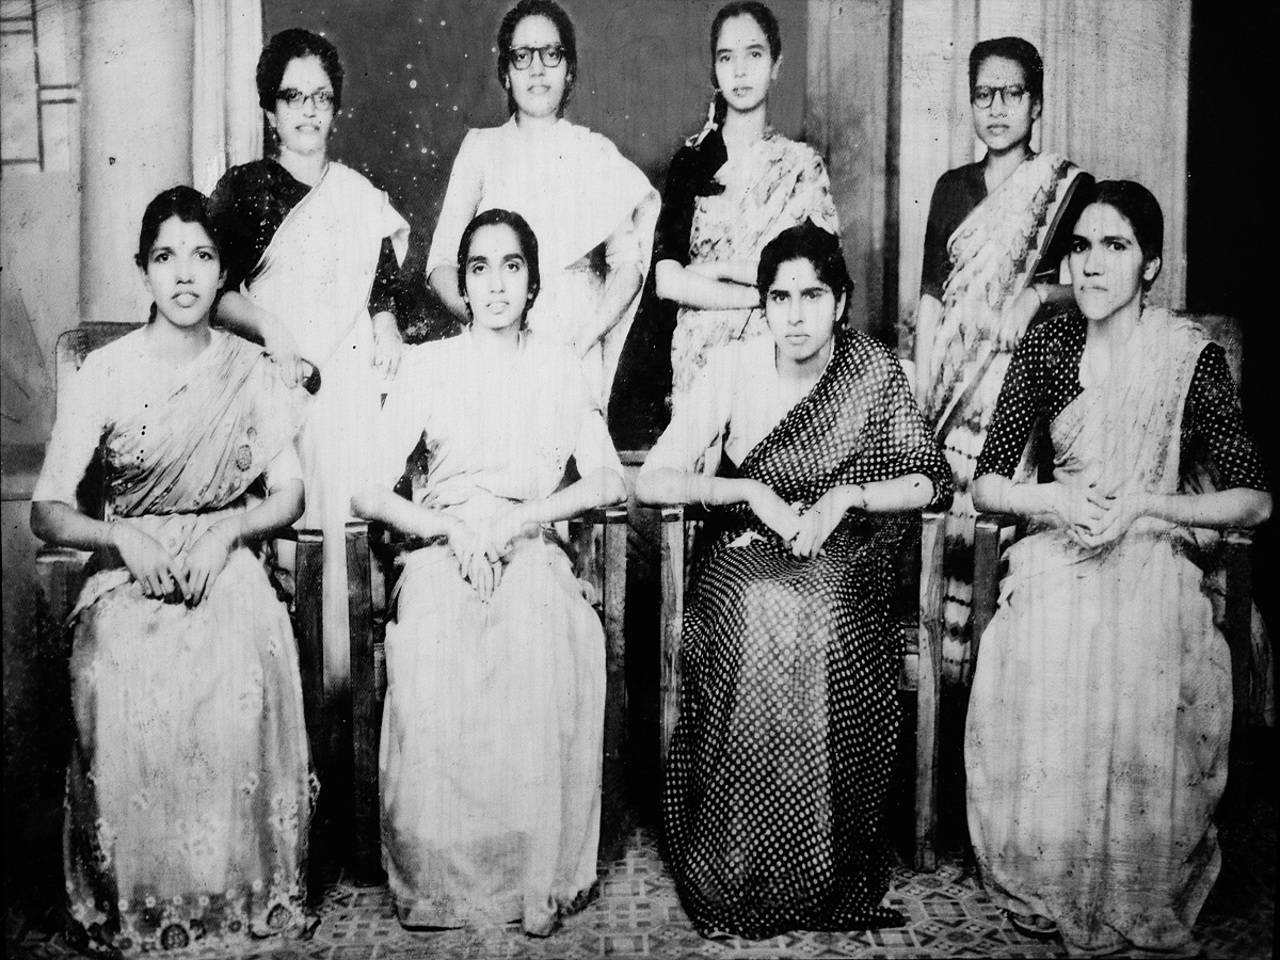 Bold and inspired: Goa's women freedom fighters | Goa News - Times ...